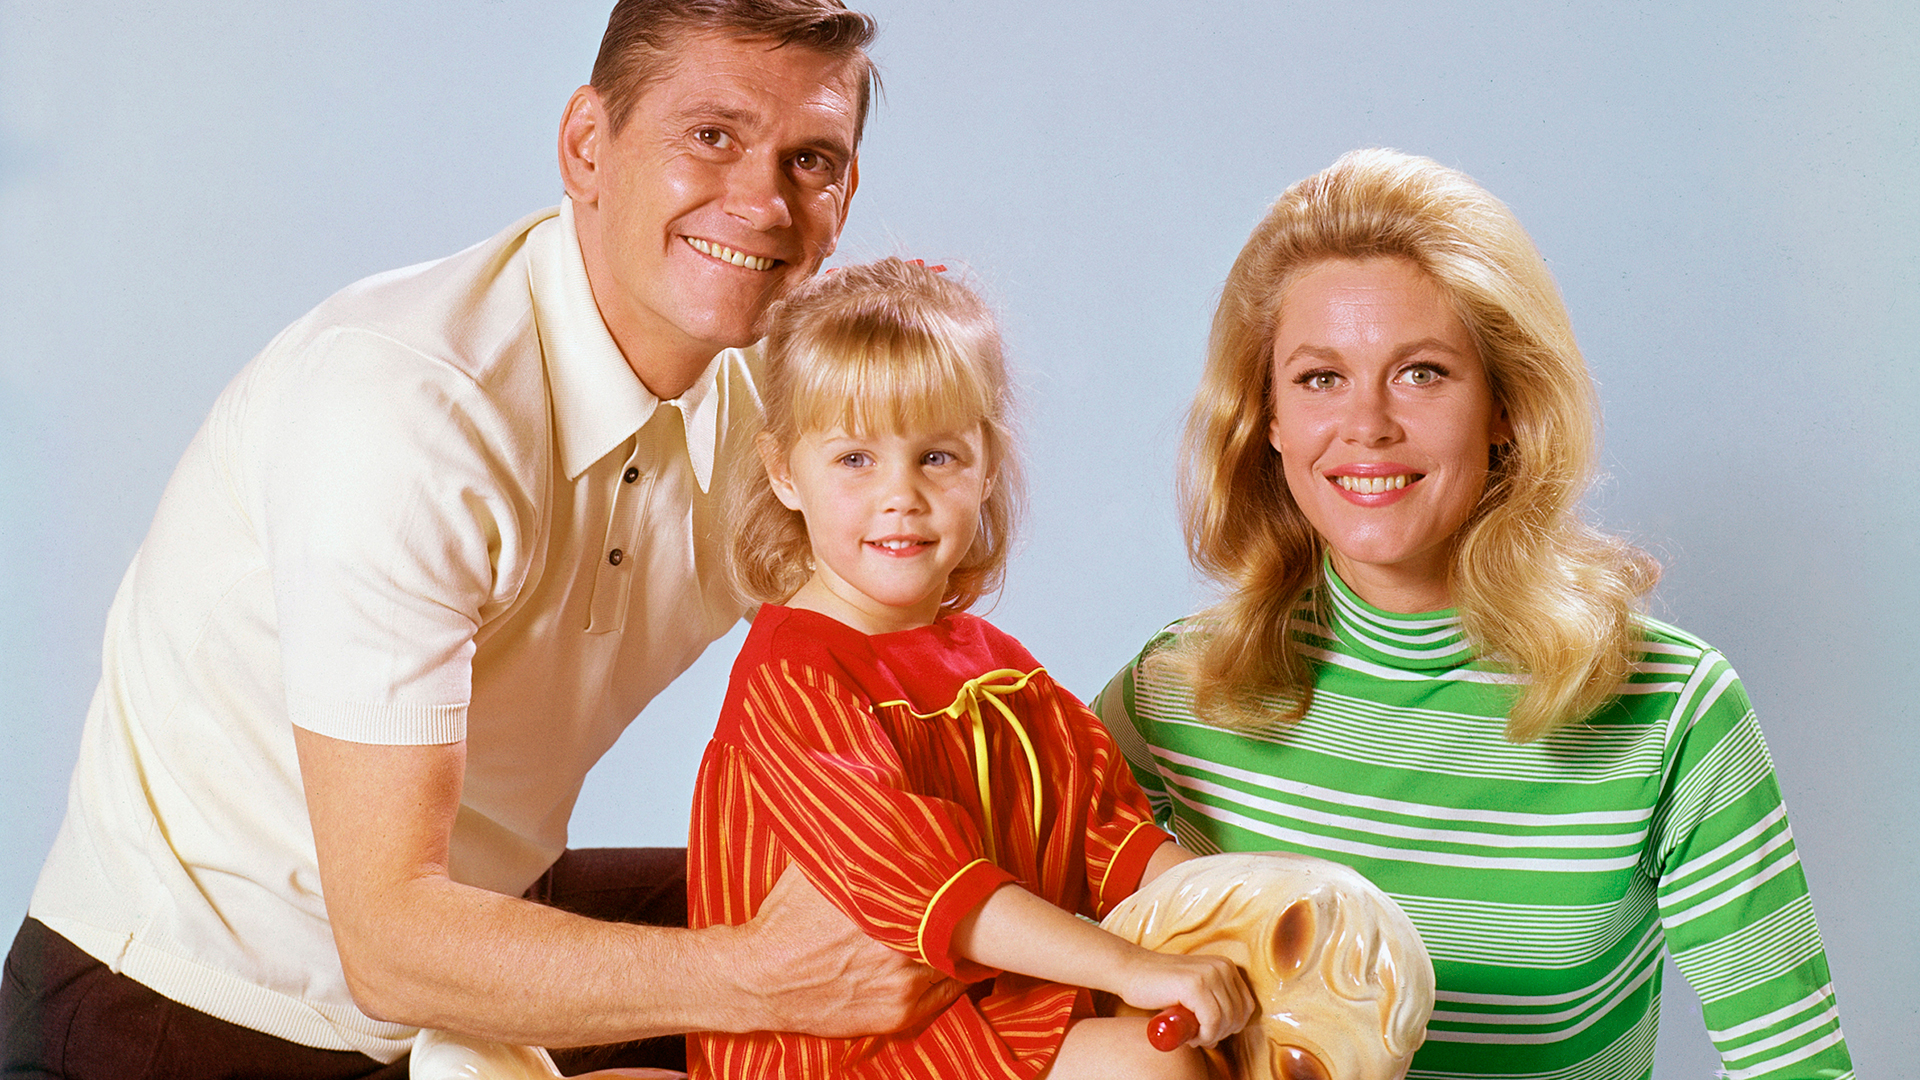 Antenna TV Has Classic Christmas Specials on Today Including ‘Three’s Company’, ‘Maude’, ‘Bewitched’, & More